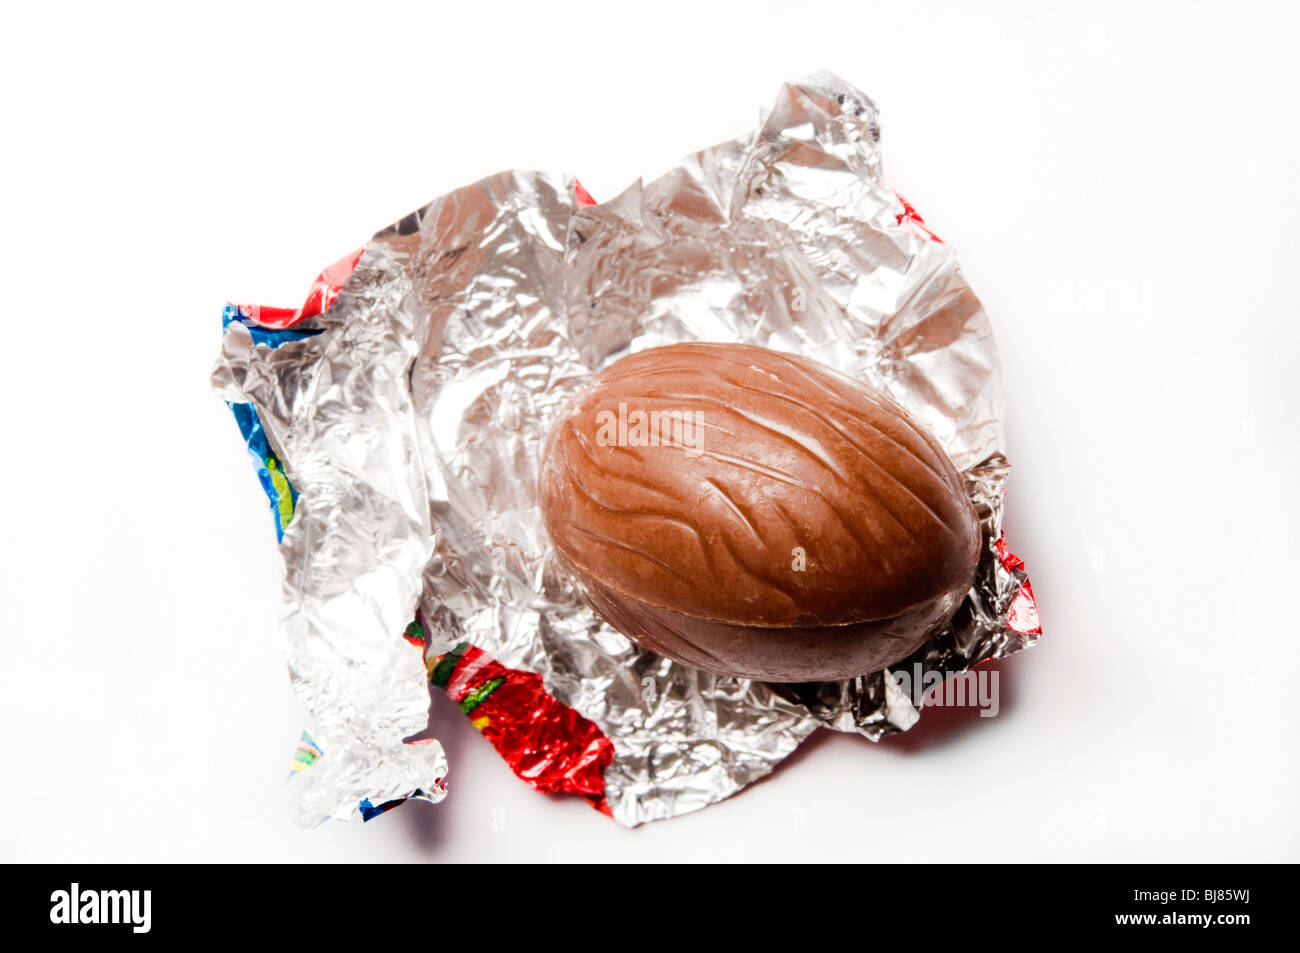 Easter chocolate egg unwrapped Stock Photo